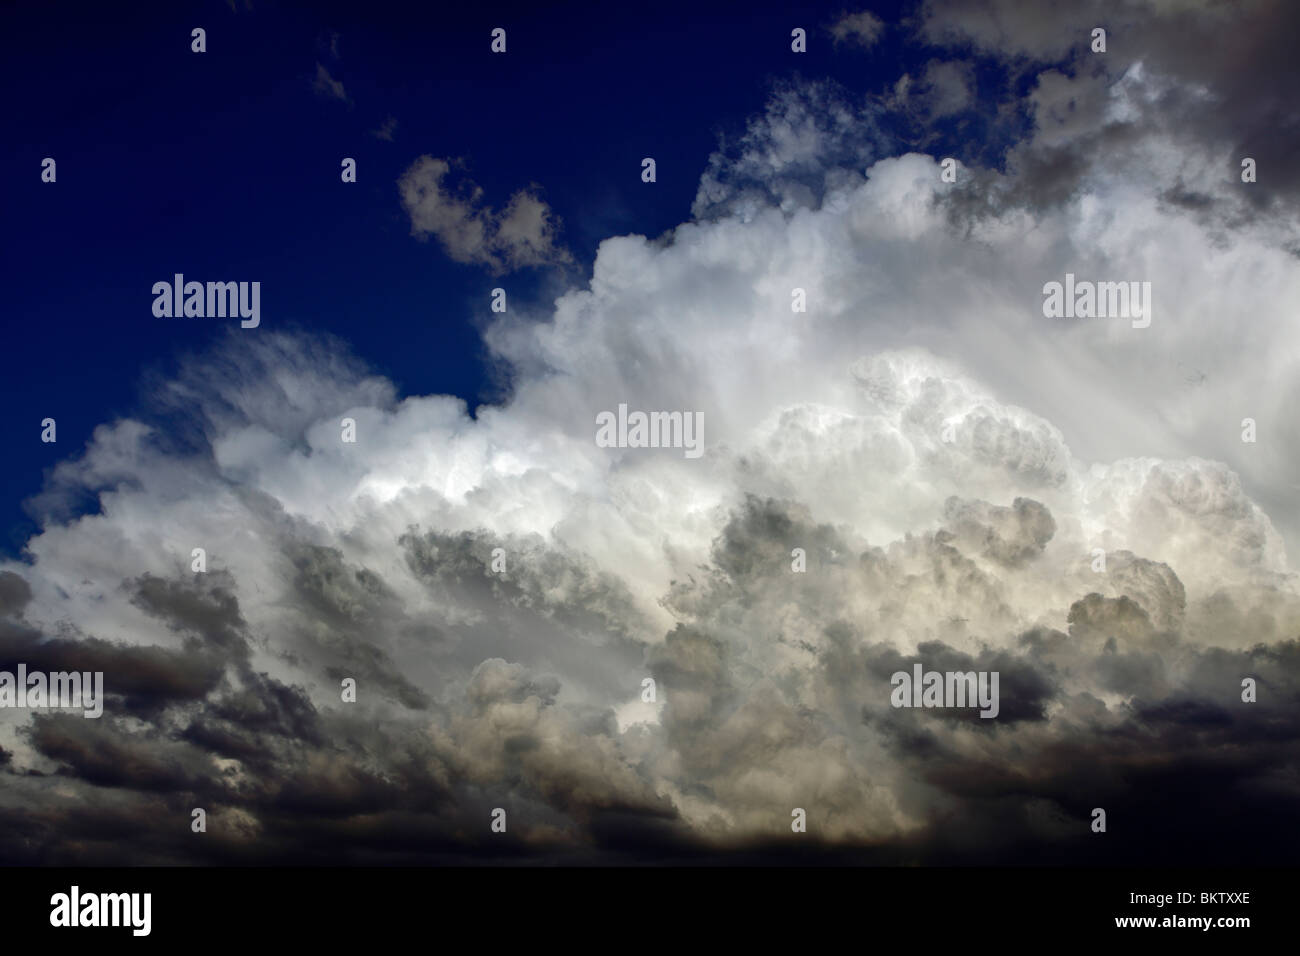 Cumulus clouds building up into a thunderstorm. Stock Photo